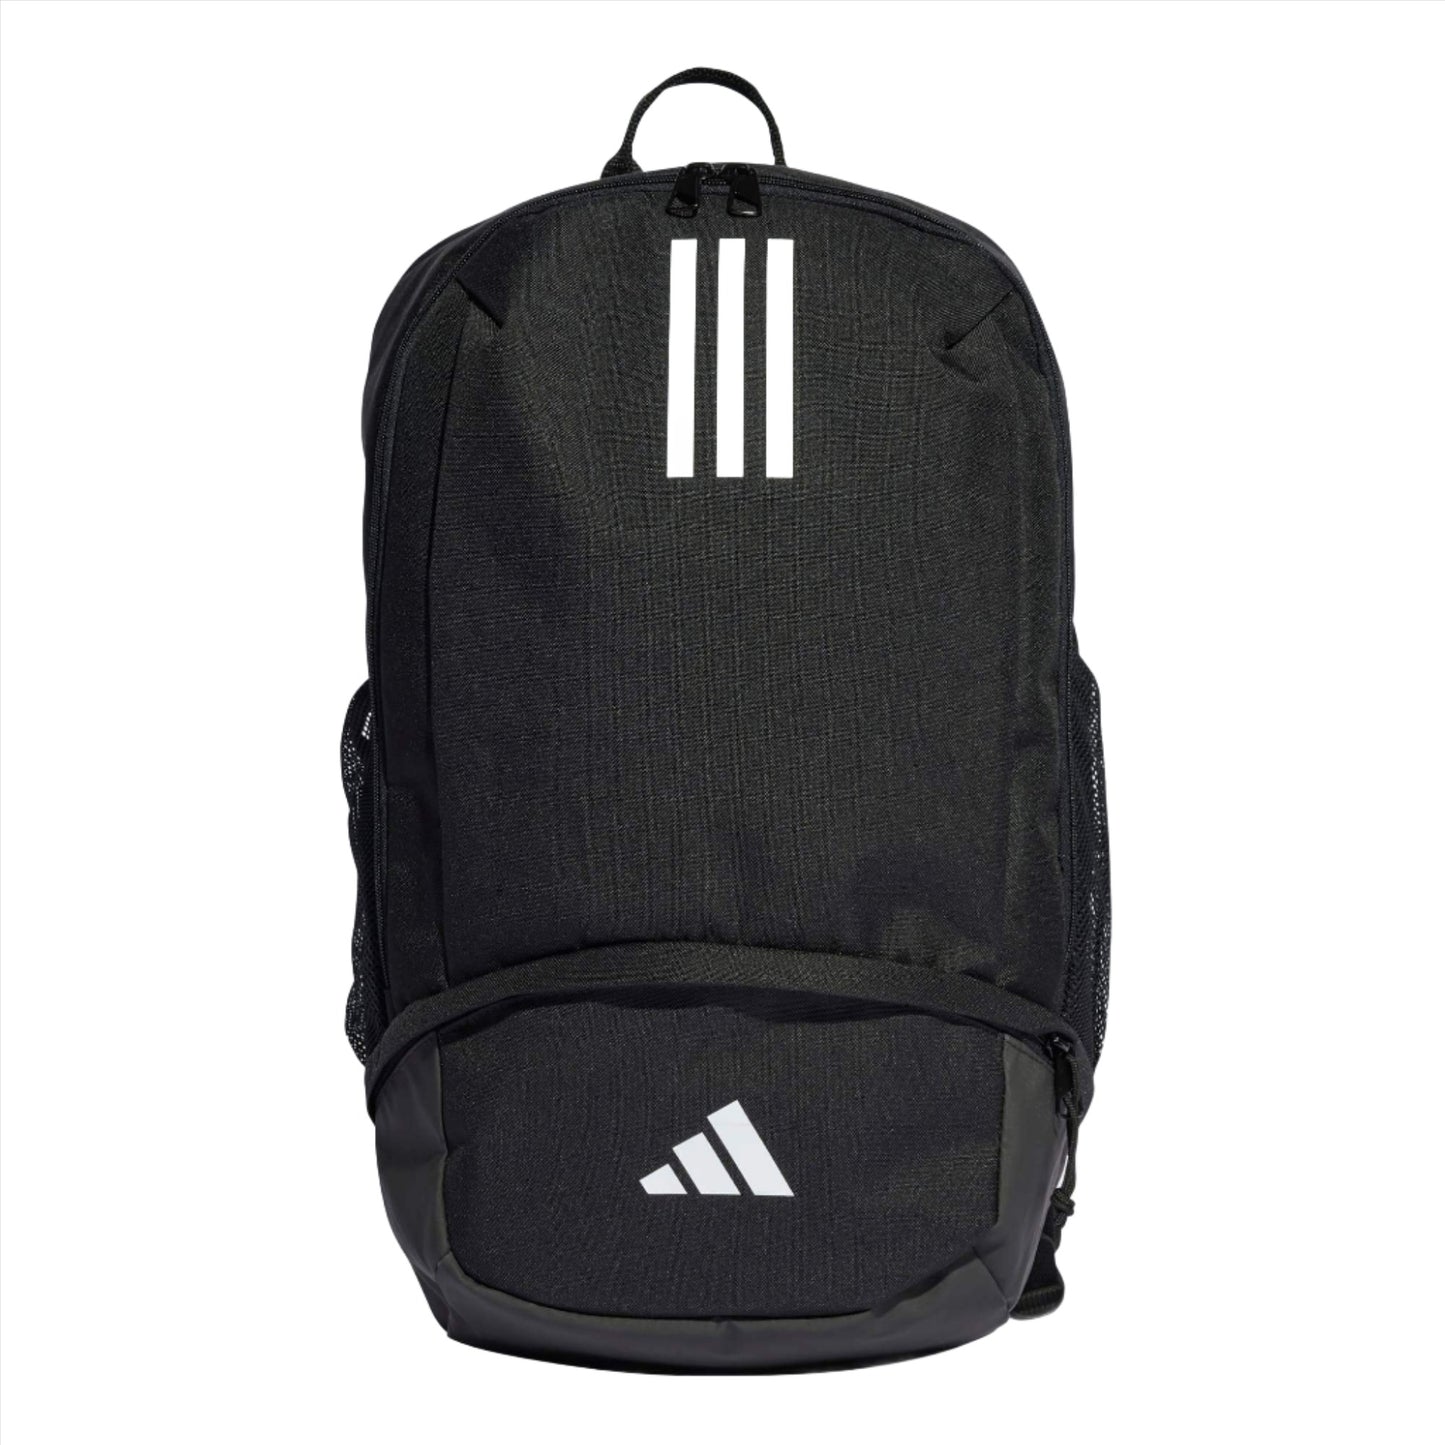 Tiro League Back Pack by Adidas - The Luxury Promotional Gifts Company Limited